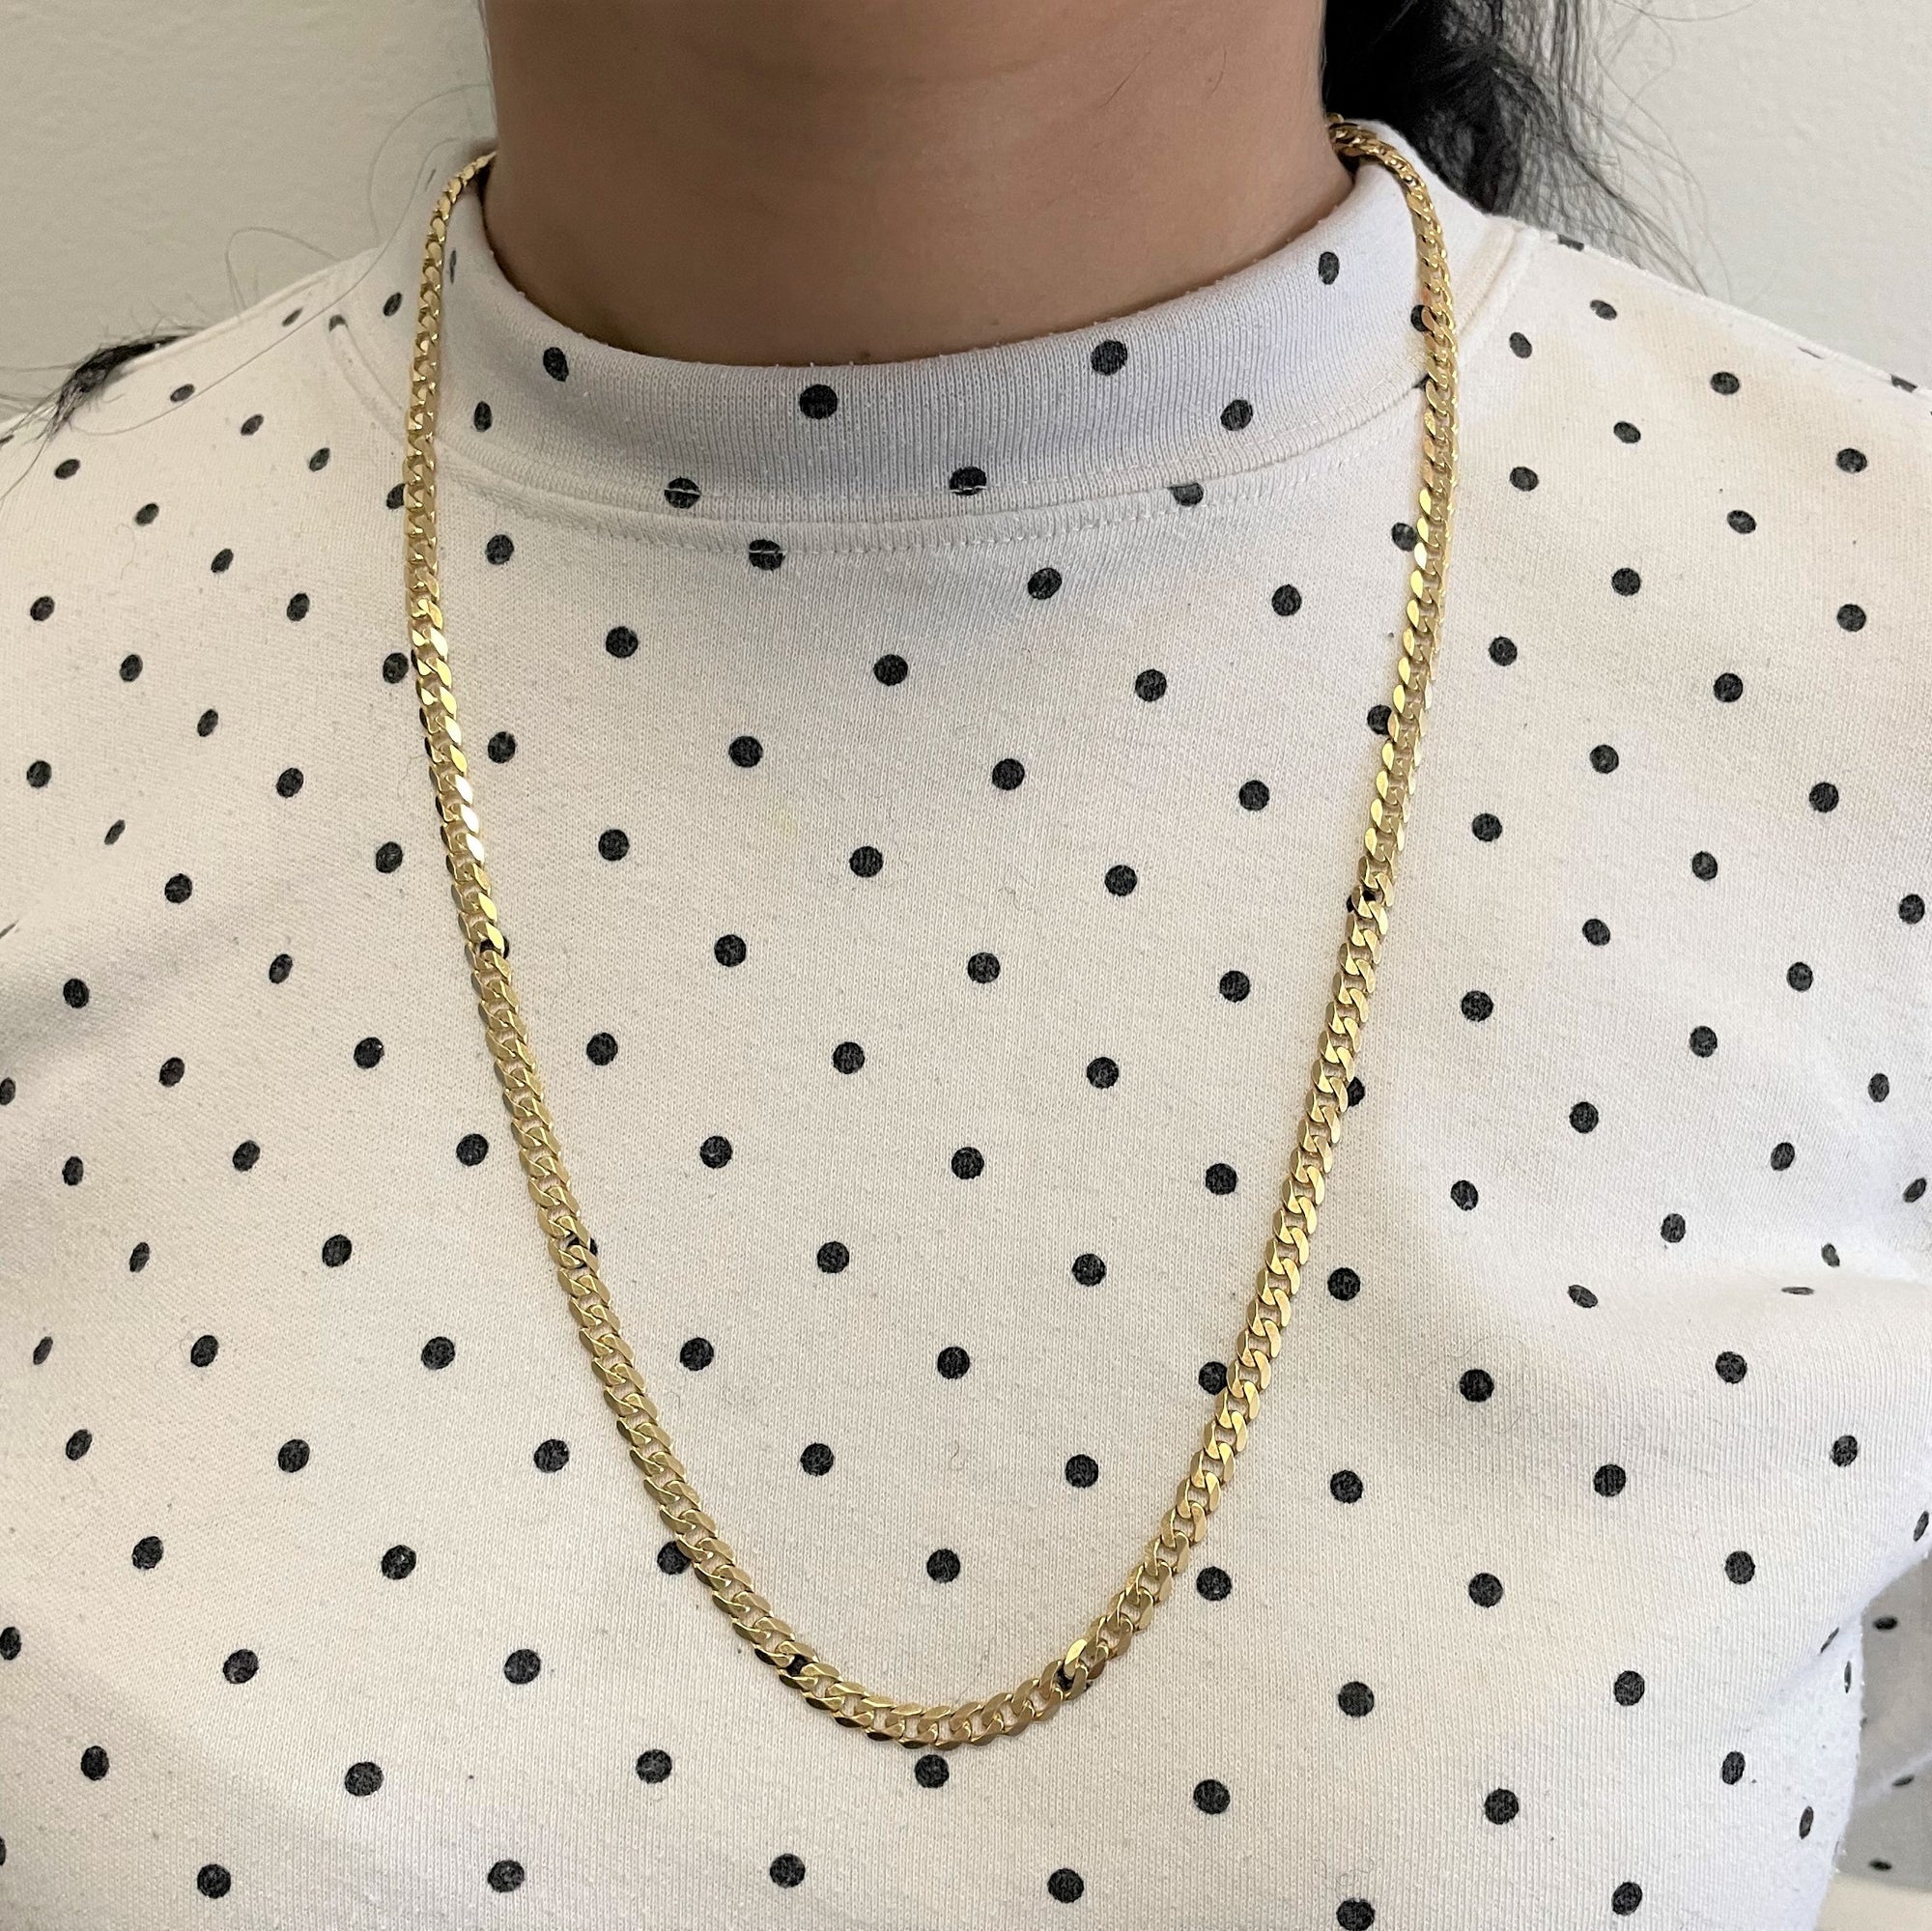 14k Yellow Gold Curb Chain | 25